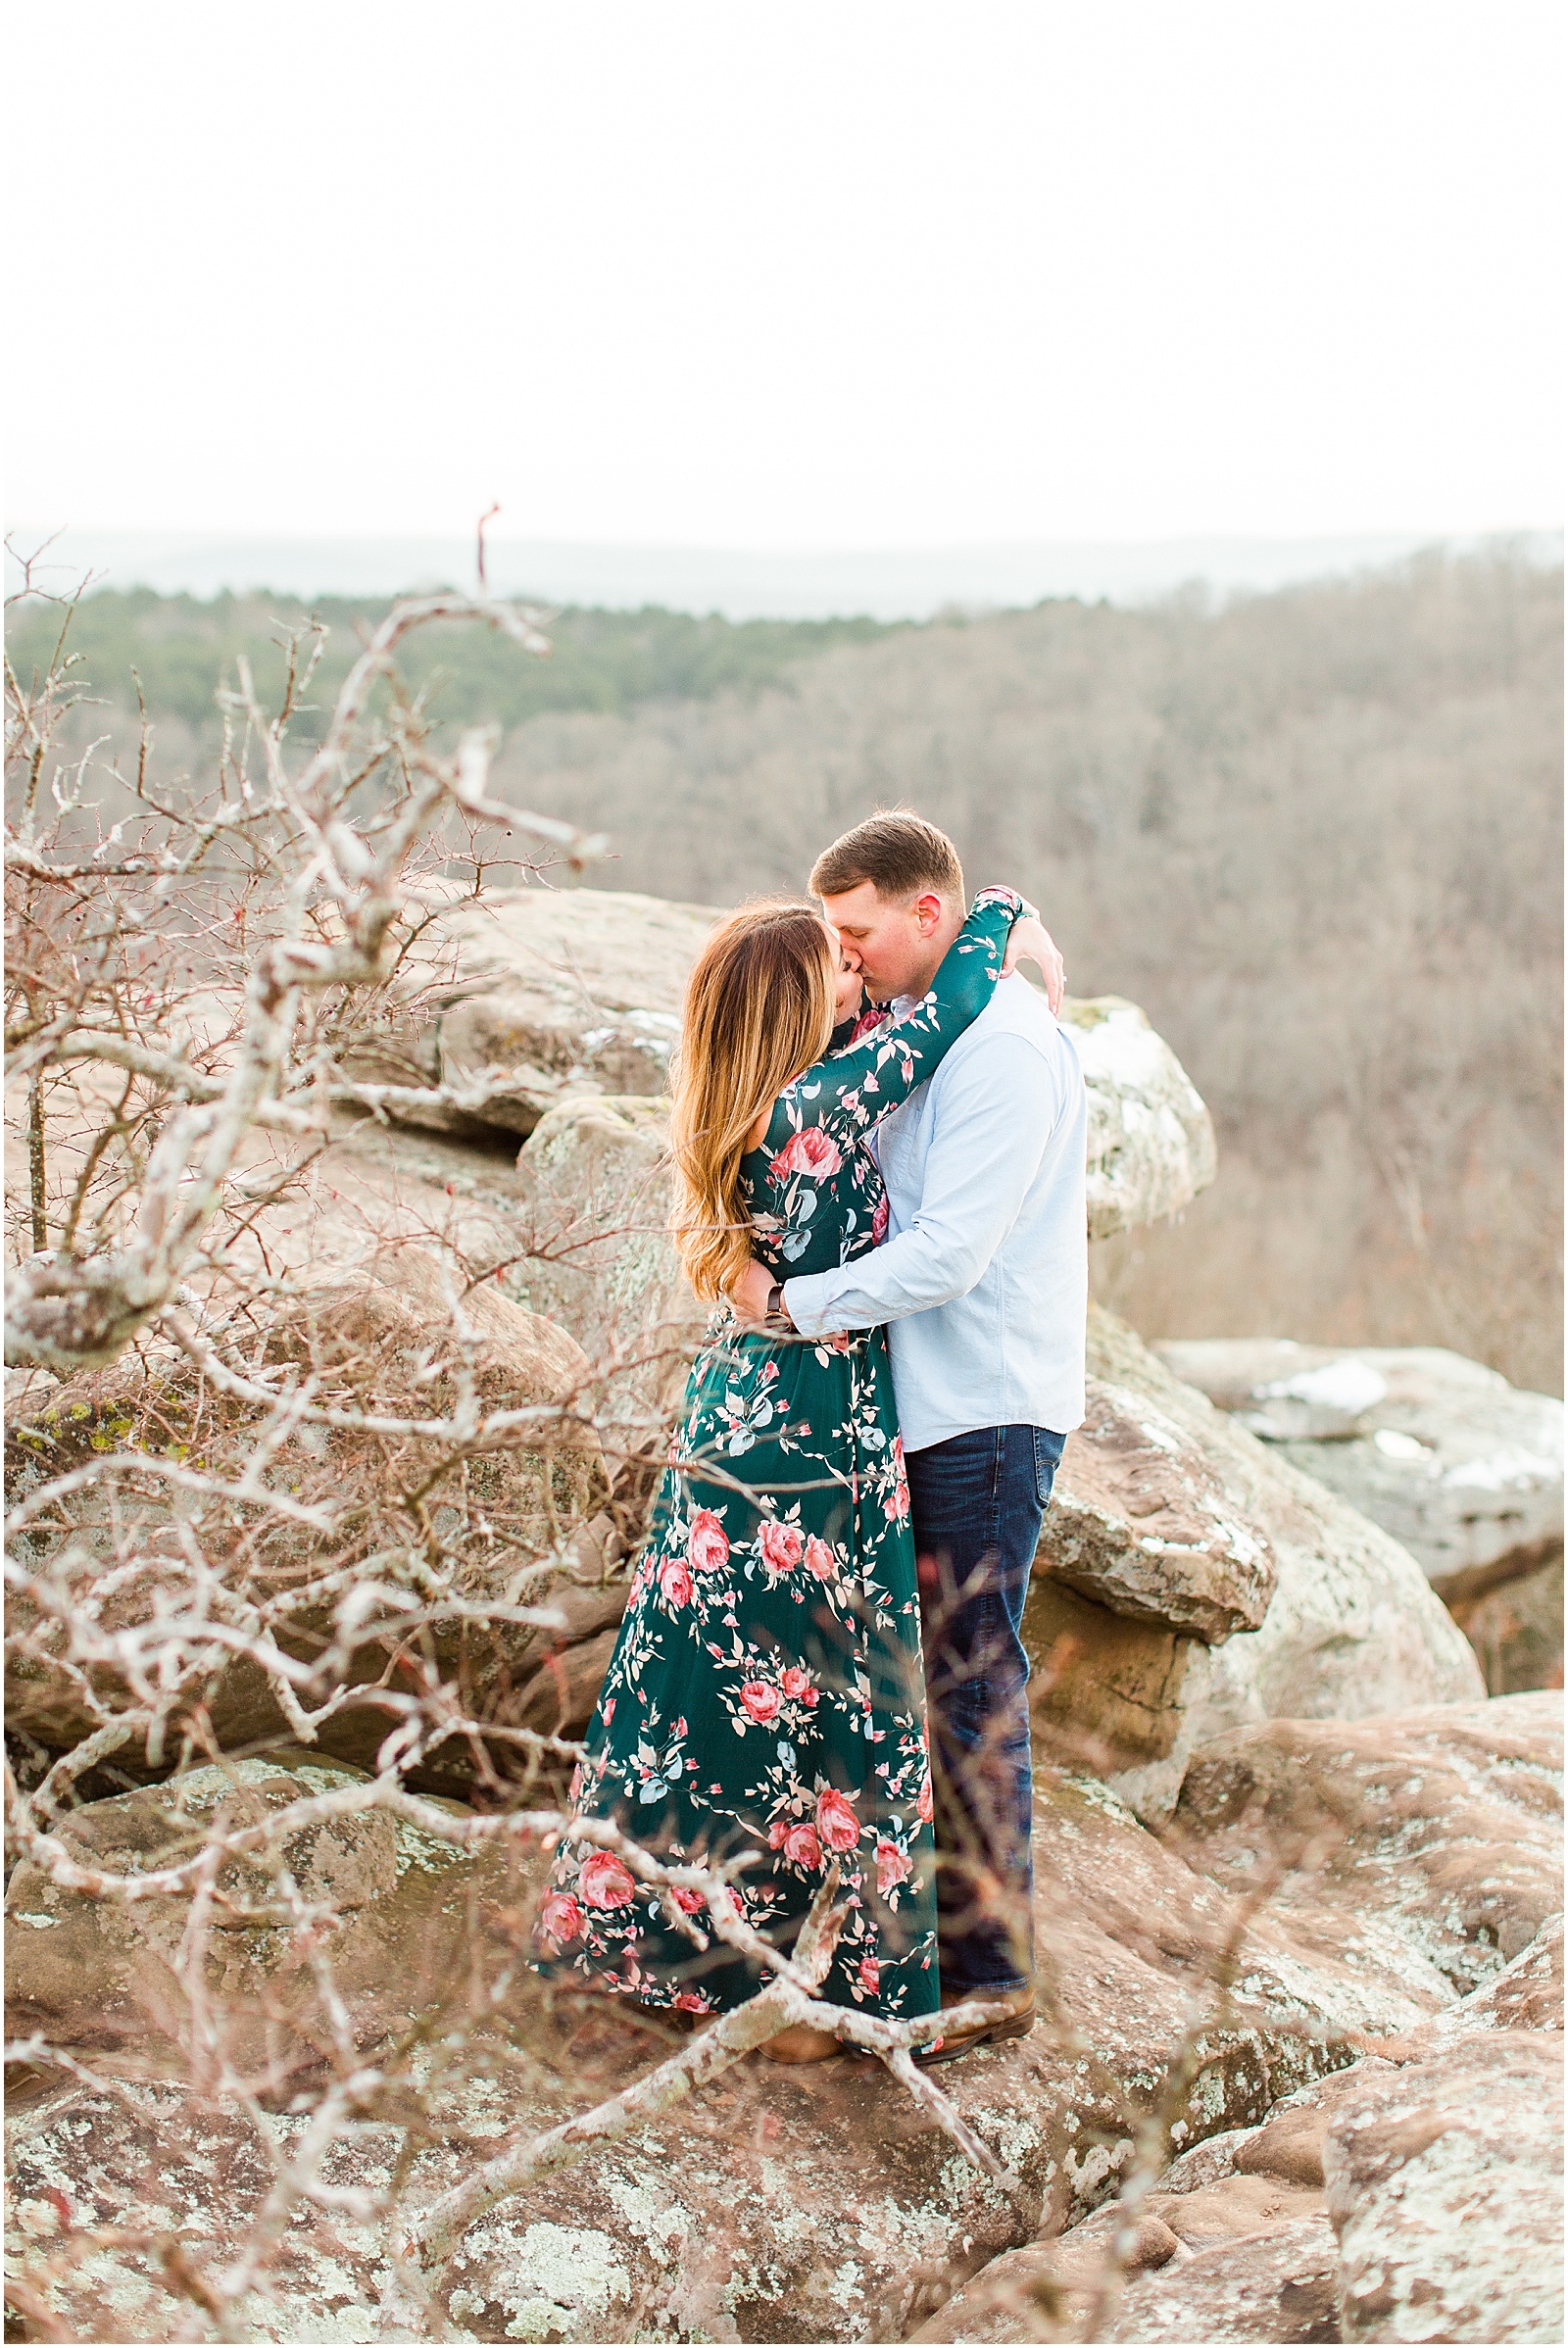 A Sunny Garden of the Gods Engagement Session | Shiloh and Lee | Bret and Brandie Photography096.jpg